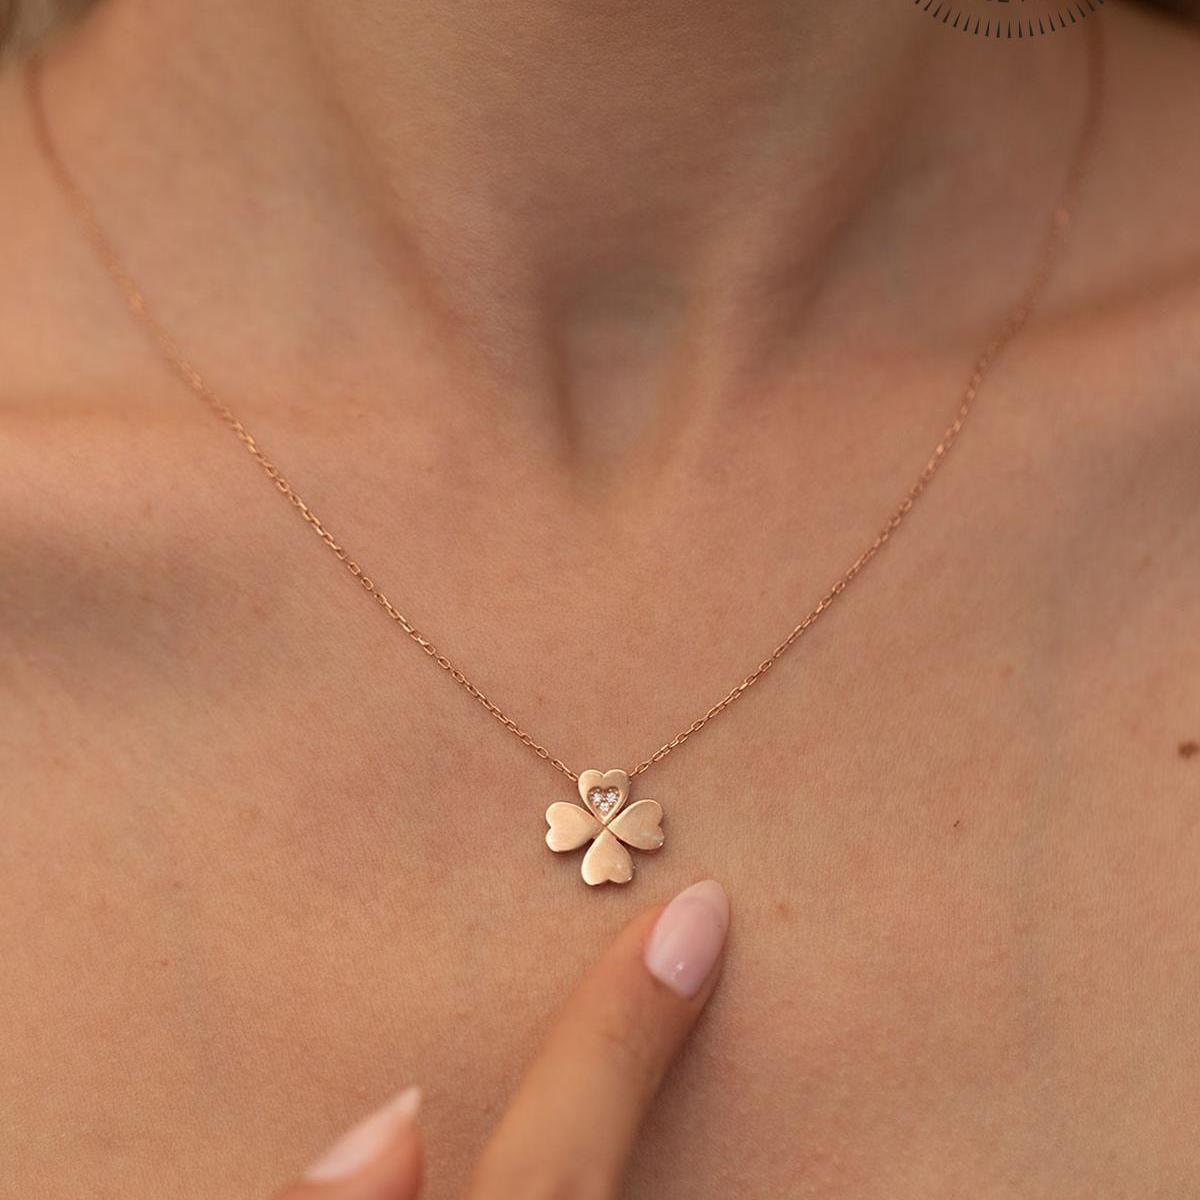 Four Leaf Clover Necklace With Swarovski Stone • Clover Necklace Gold - Trending Silver Gifts